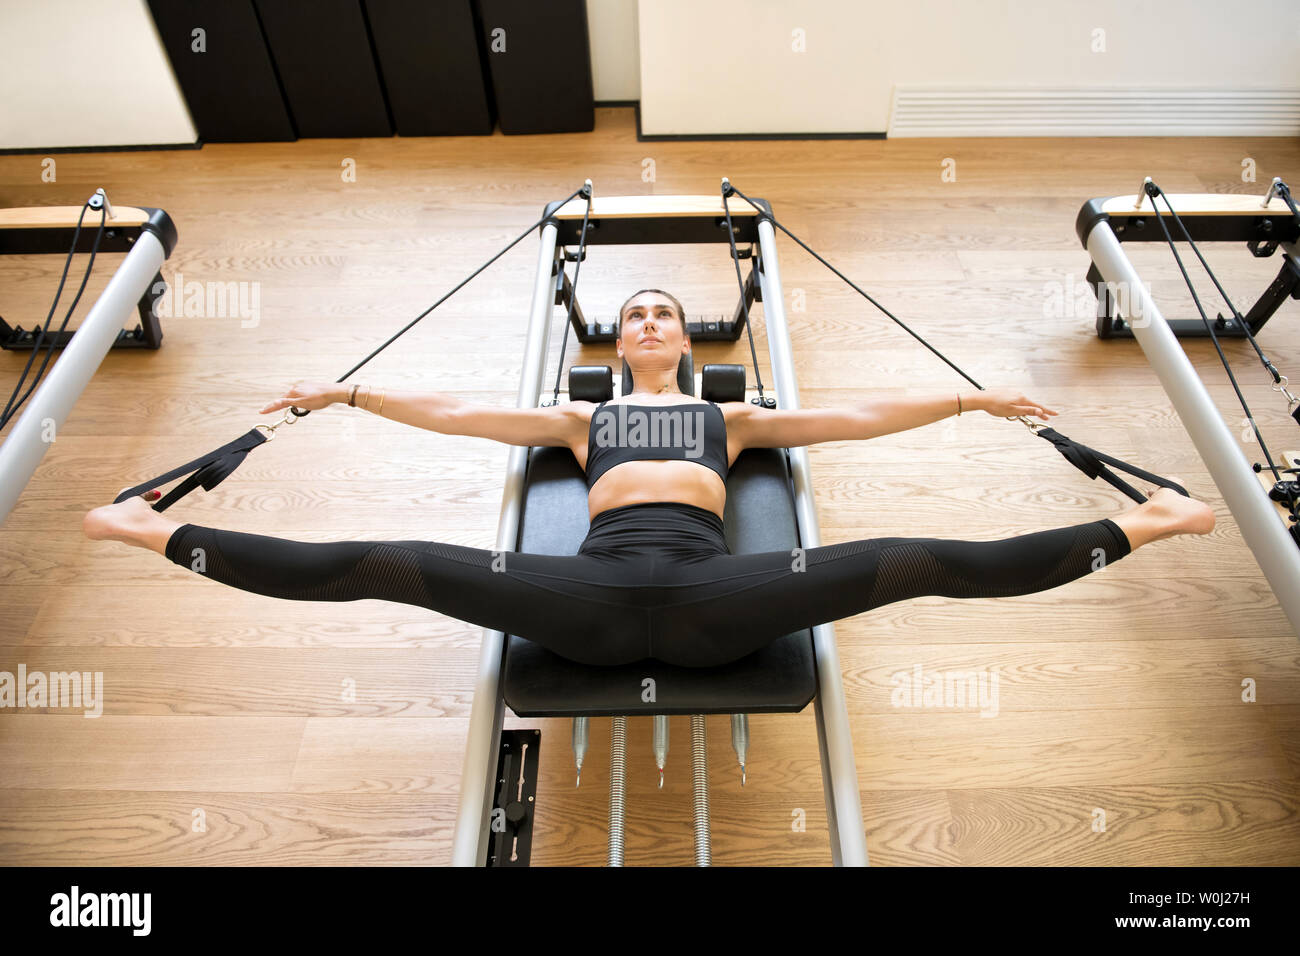 Overhead view on female adult in black outfit using pilates